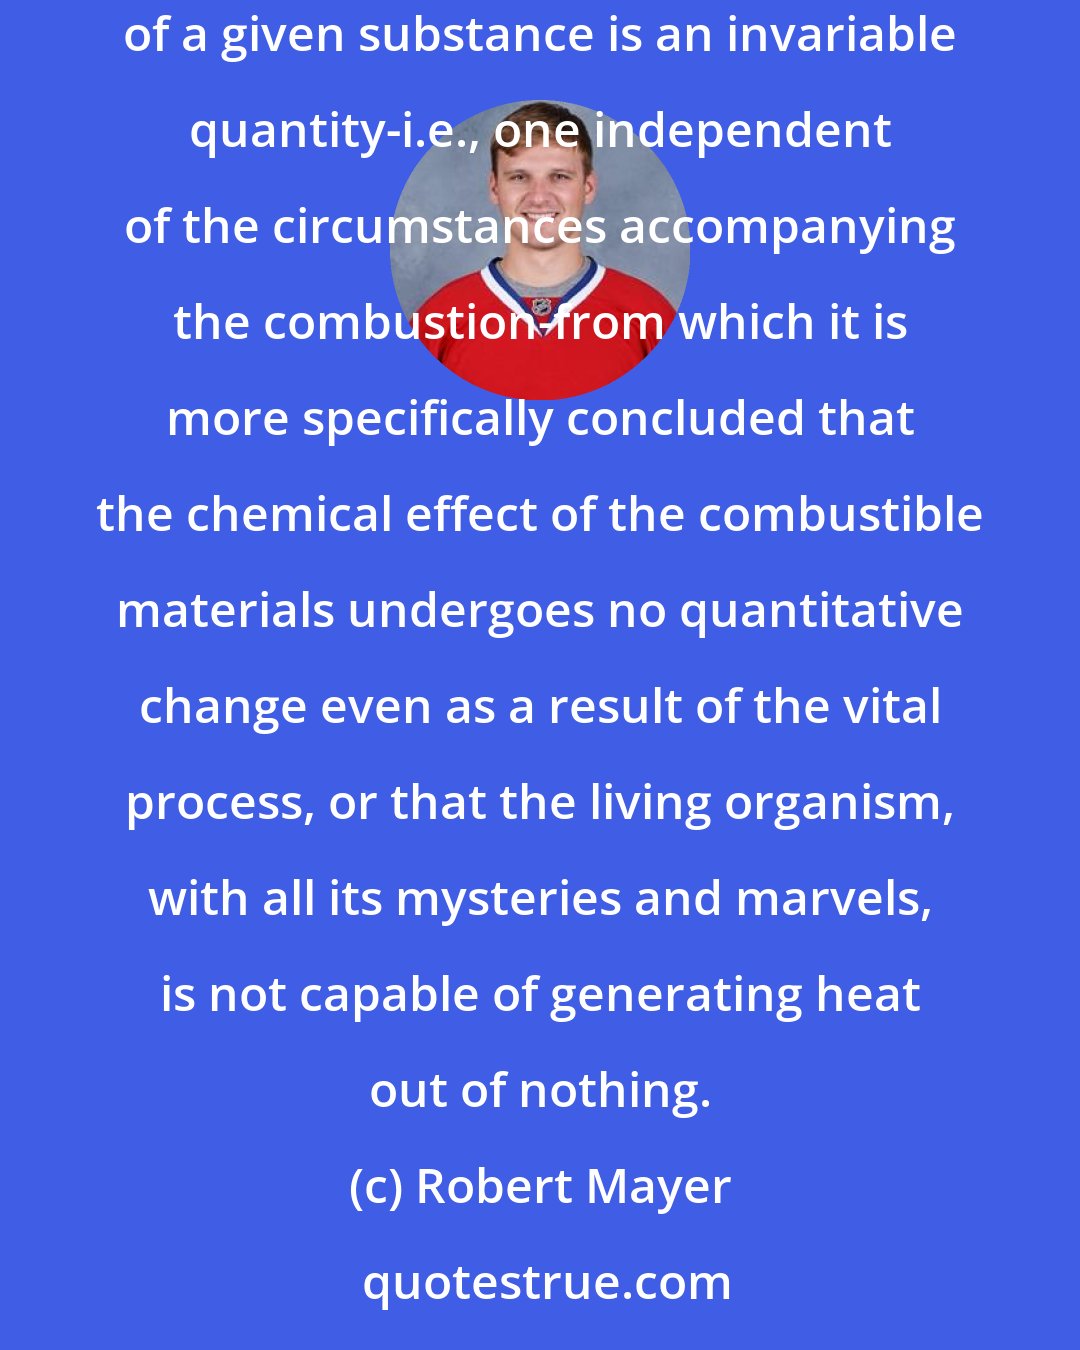 Robert Mayer: The physiological combustion theory takes as its starting point the fundamental principle that the amount of heat that arises from the combustion of a given substance is an invariable quantity-i.e., one independent of the circumstances accompanying the combustion-from which it is more specifically concluded that the chemical effect of the combustible materials undergoes no quantitative change even as a result of the vital process, or that the living organism, with all its mysteries and marvels, is not capable of generating heat out of nothing.